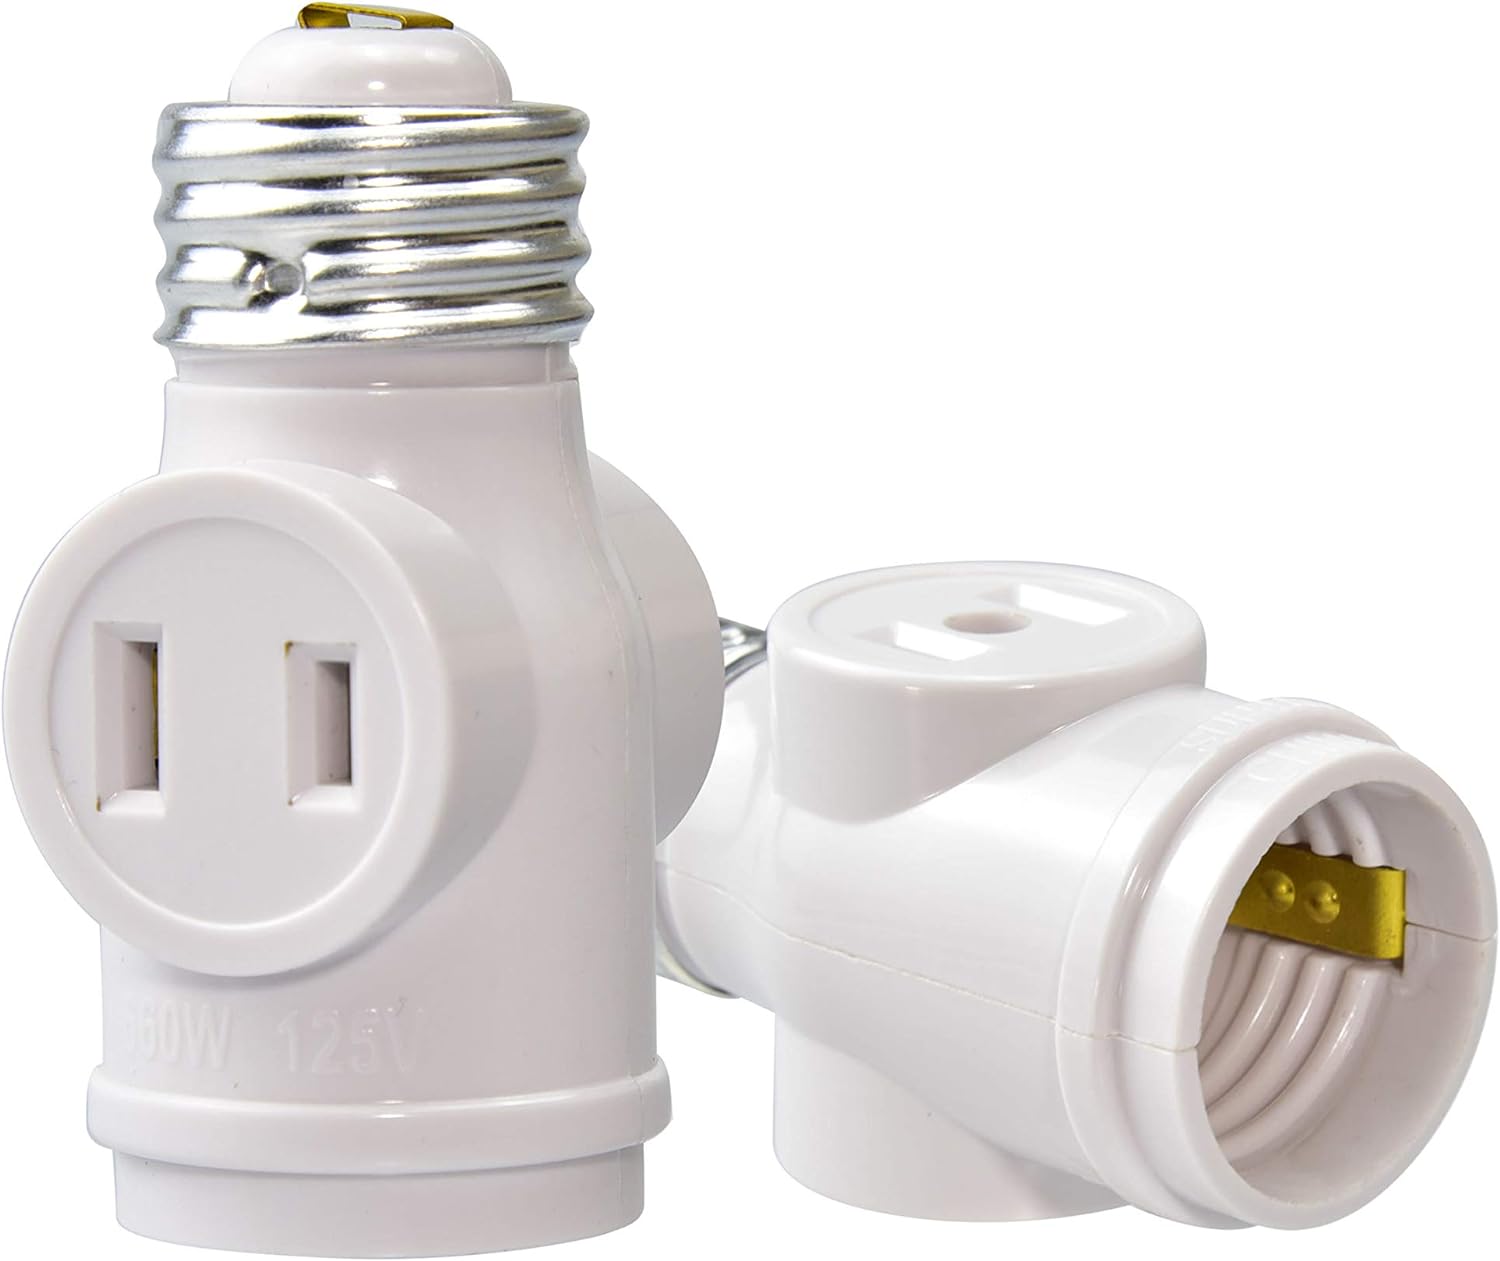 10 Amazing Light Socket Replacement for 2023